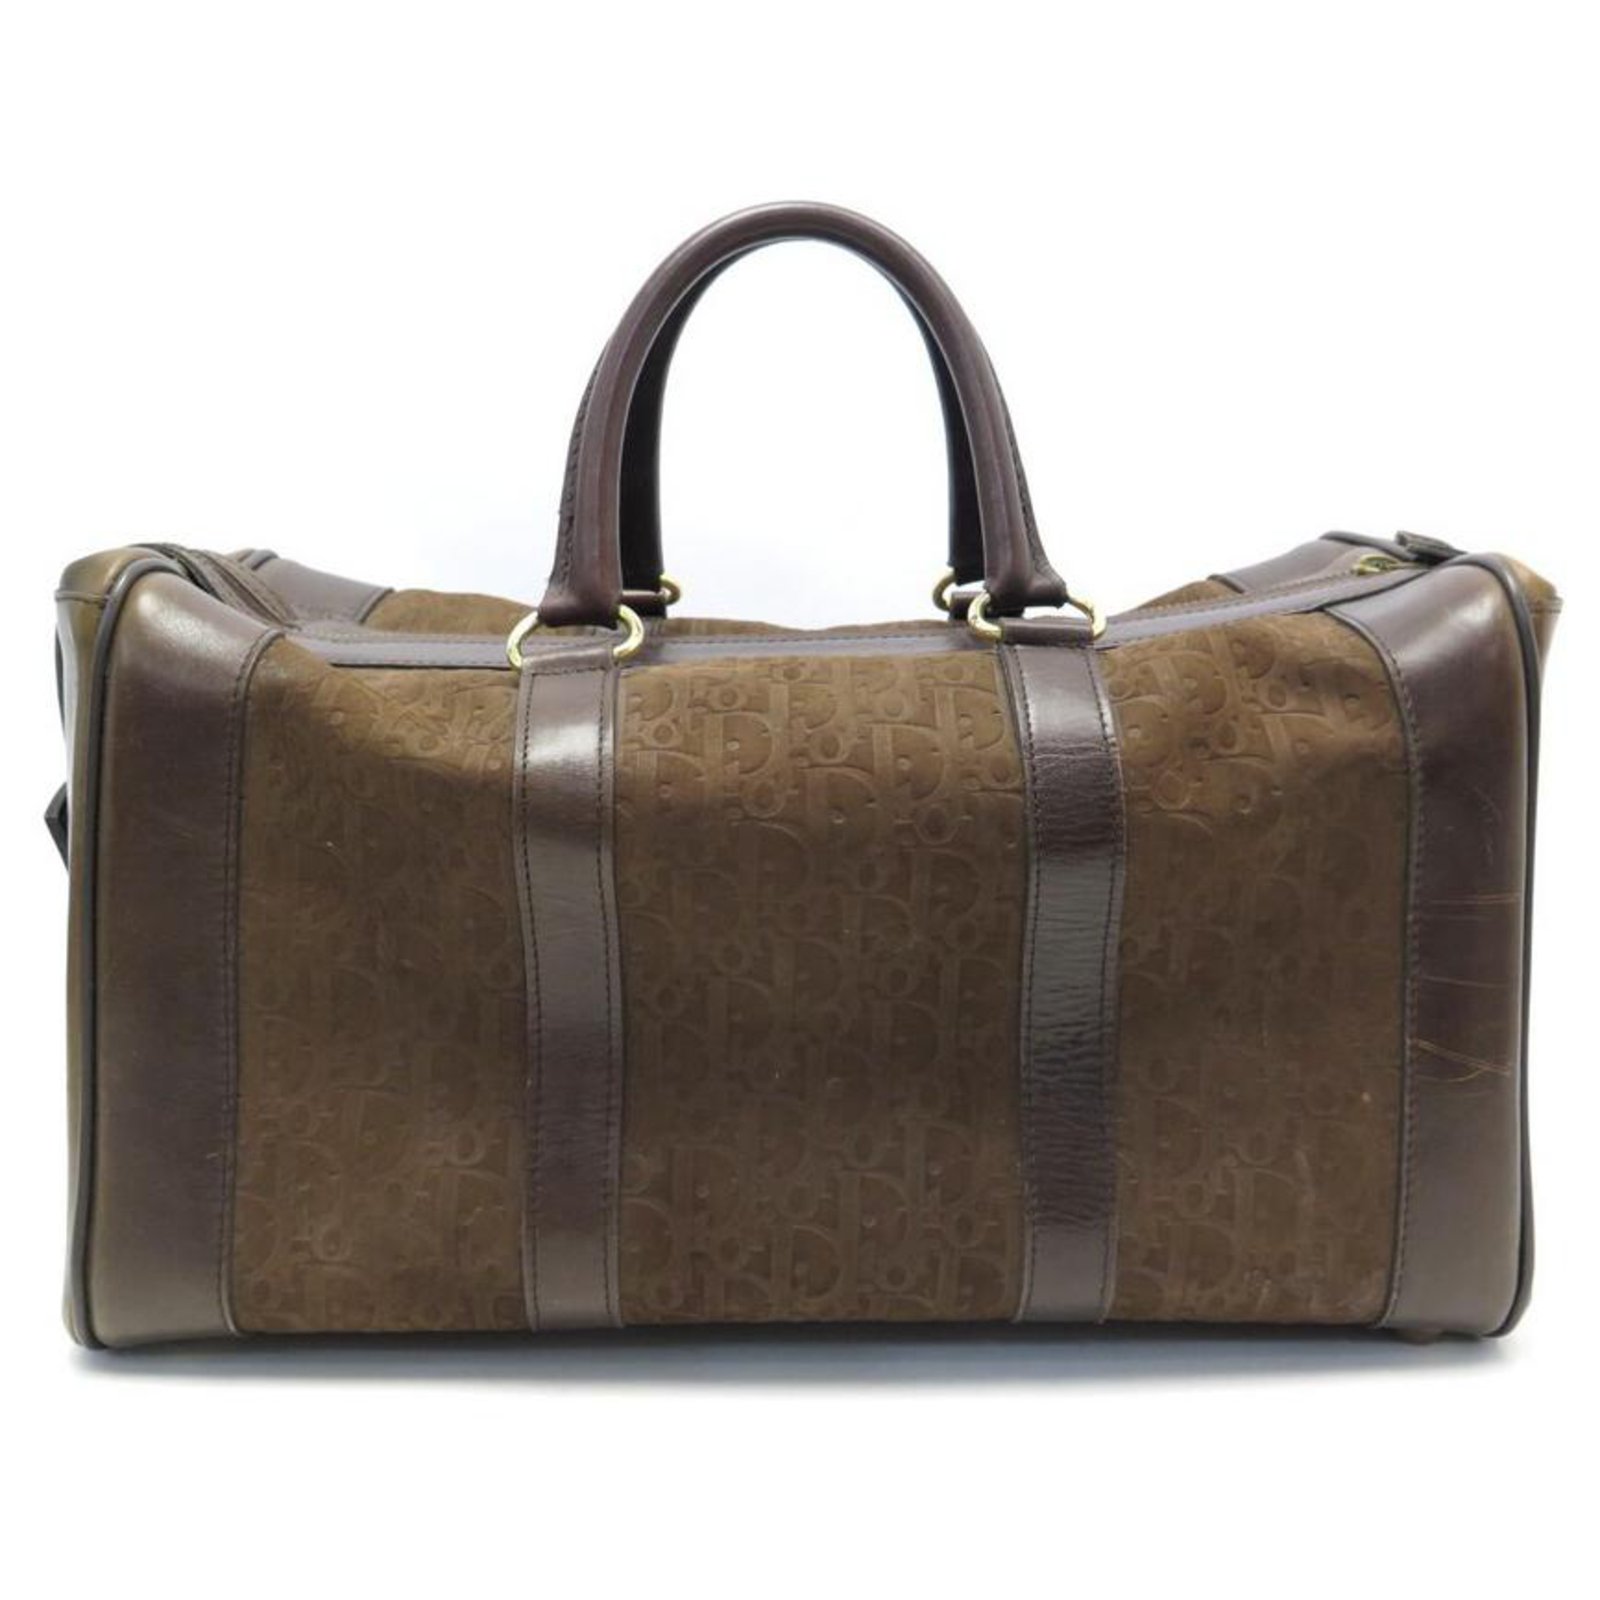 Christian Dior Honeycomb Duffle Bag - Brown Luggage and Travel